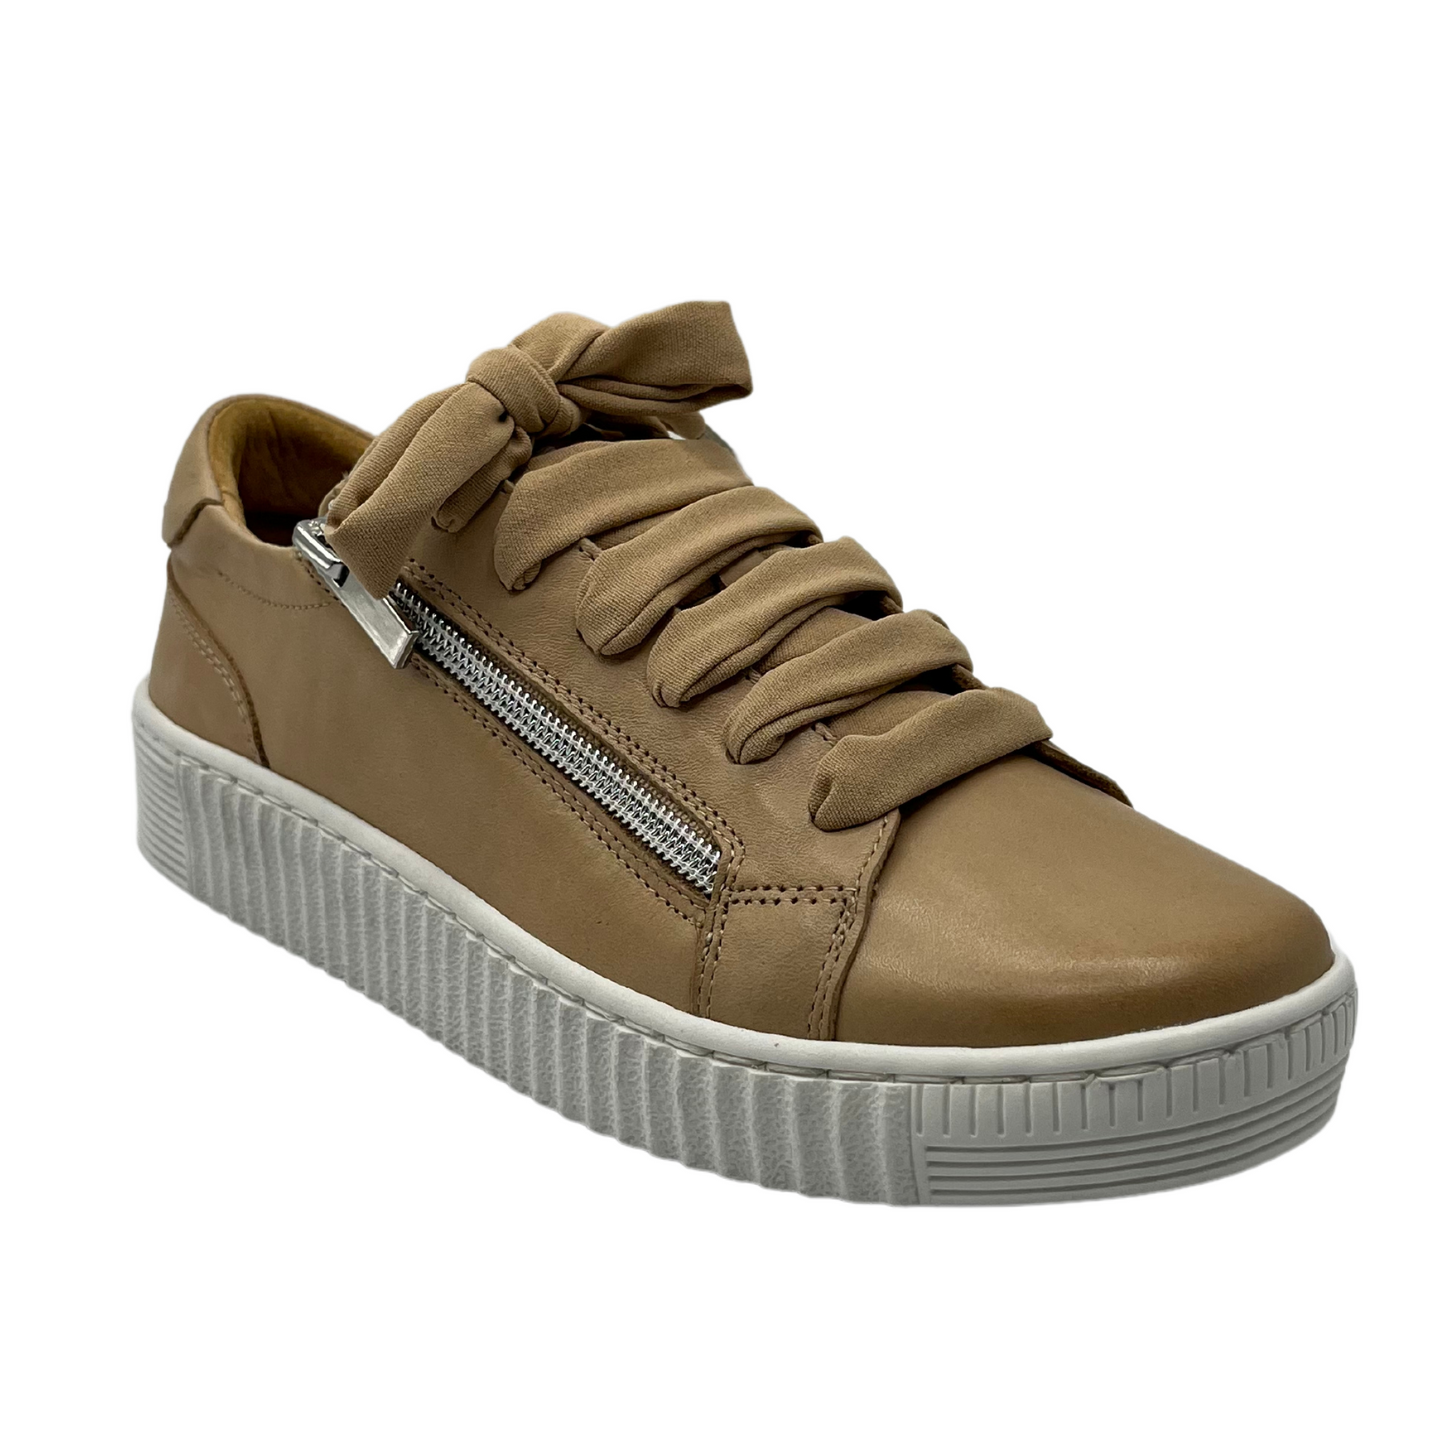 45 degree angled view of nude leather sneaker with matching laces and silver side zipper. White rubber outsole